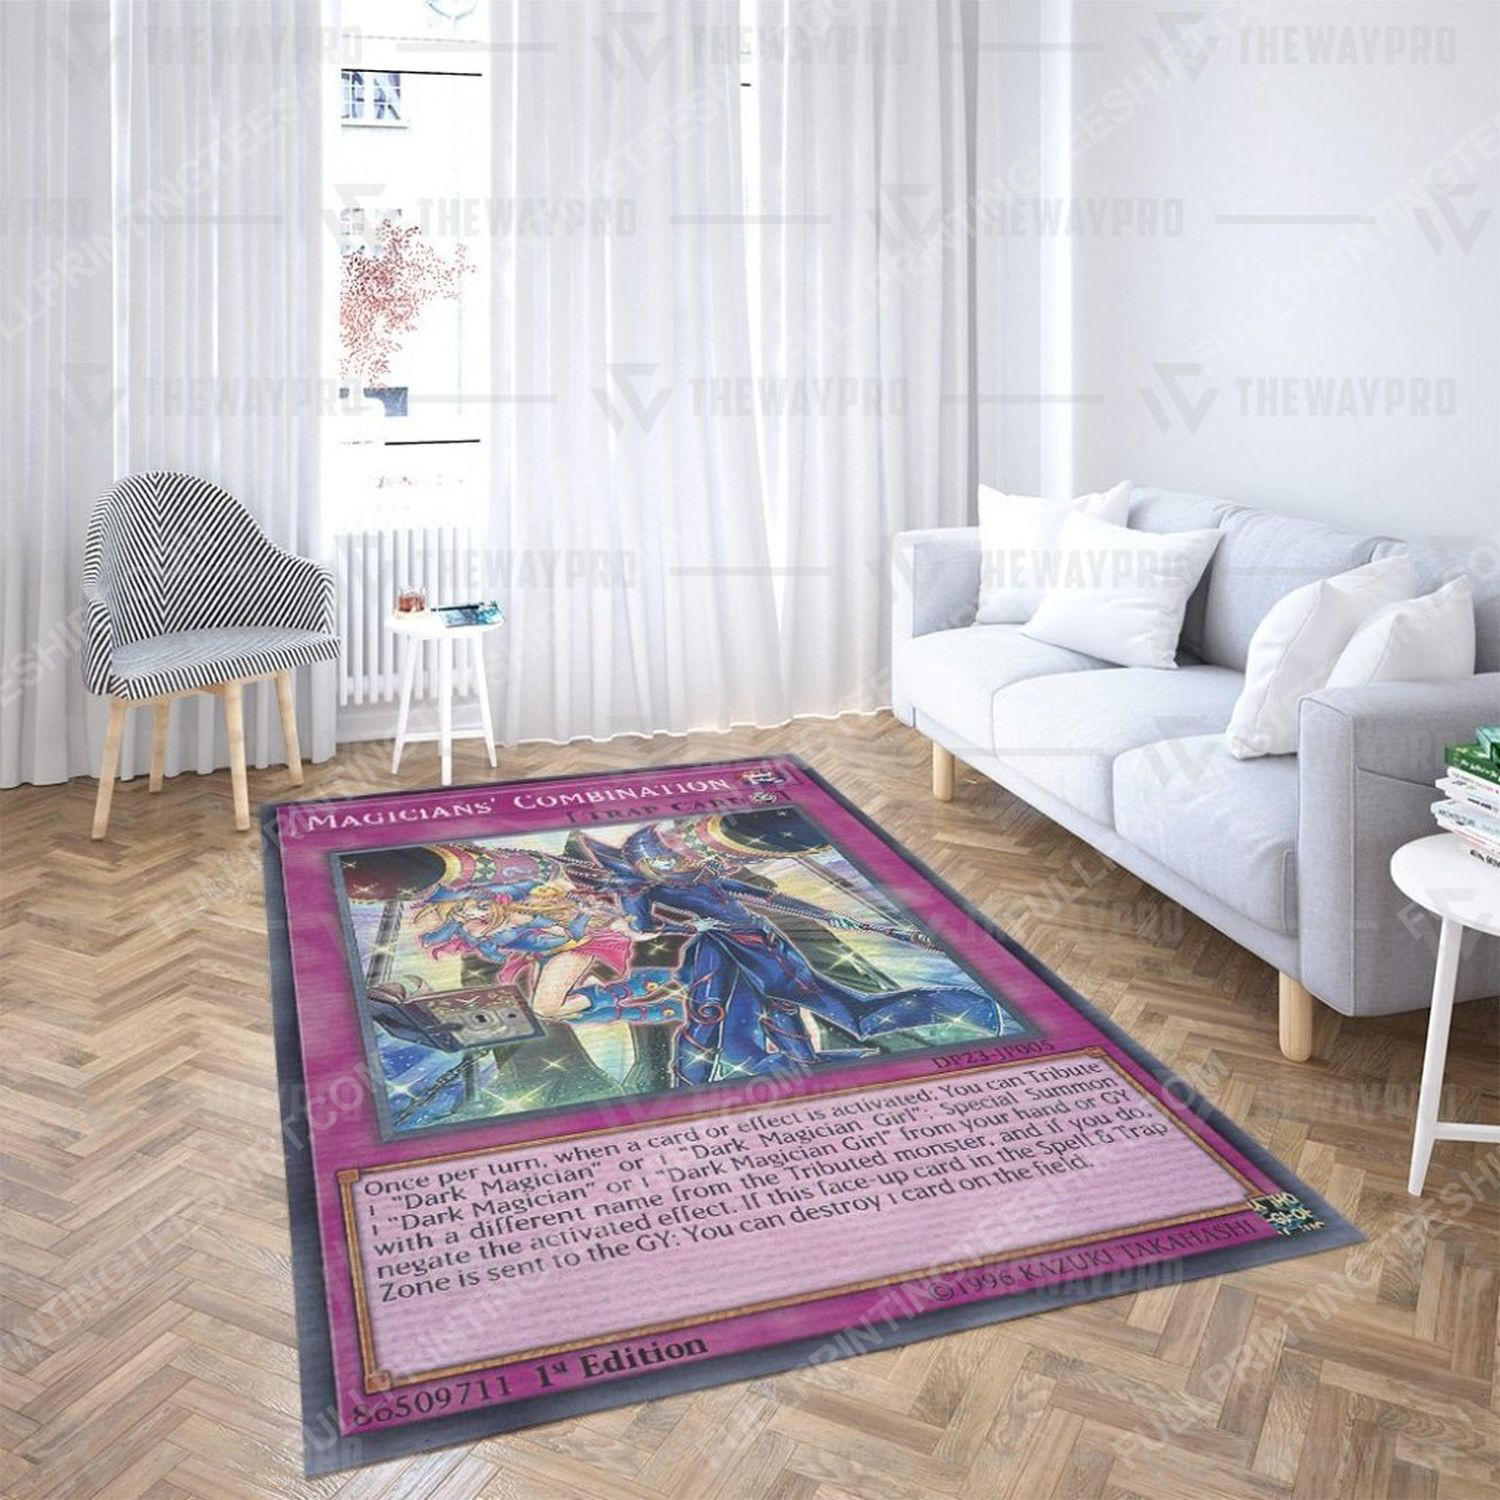 Yu-gi-oh magicians' combination all over print rug